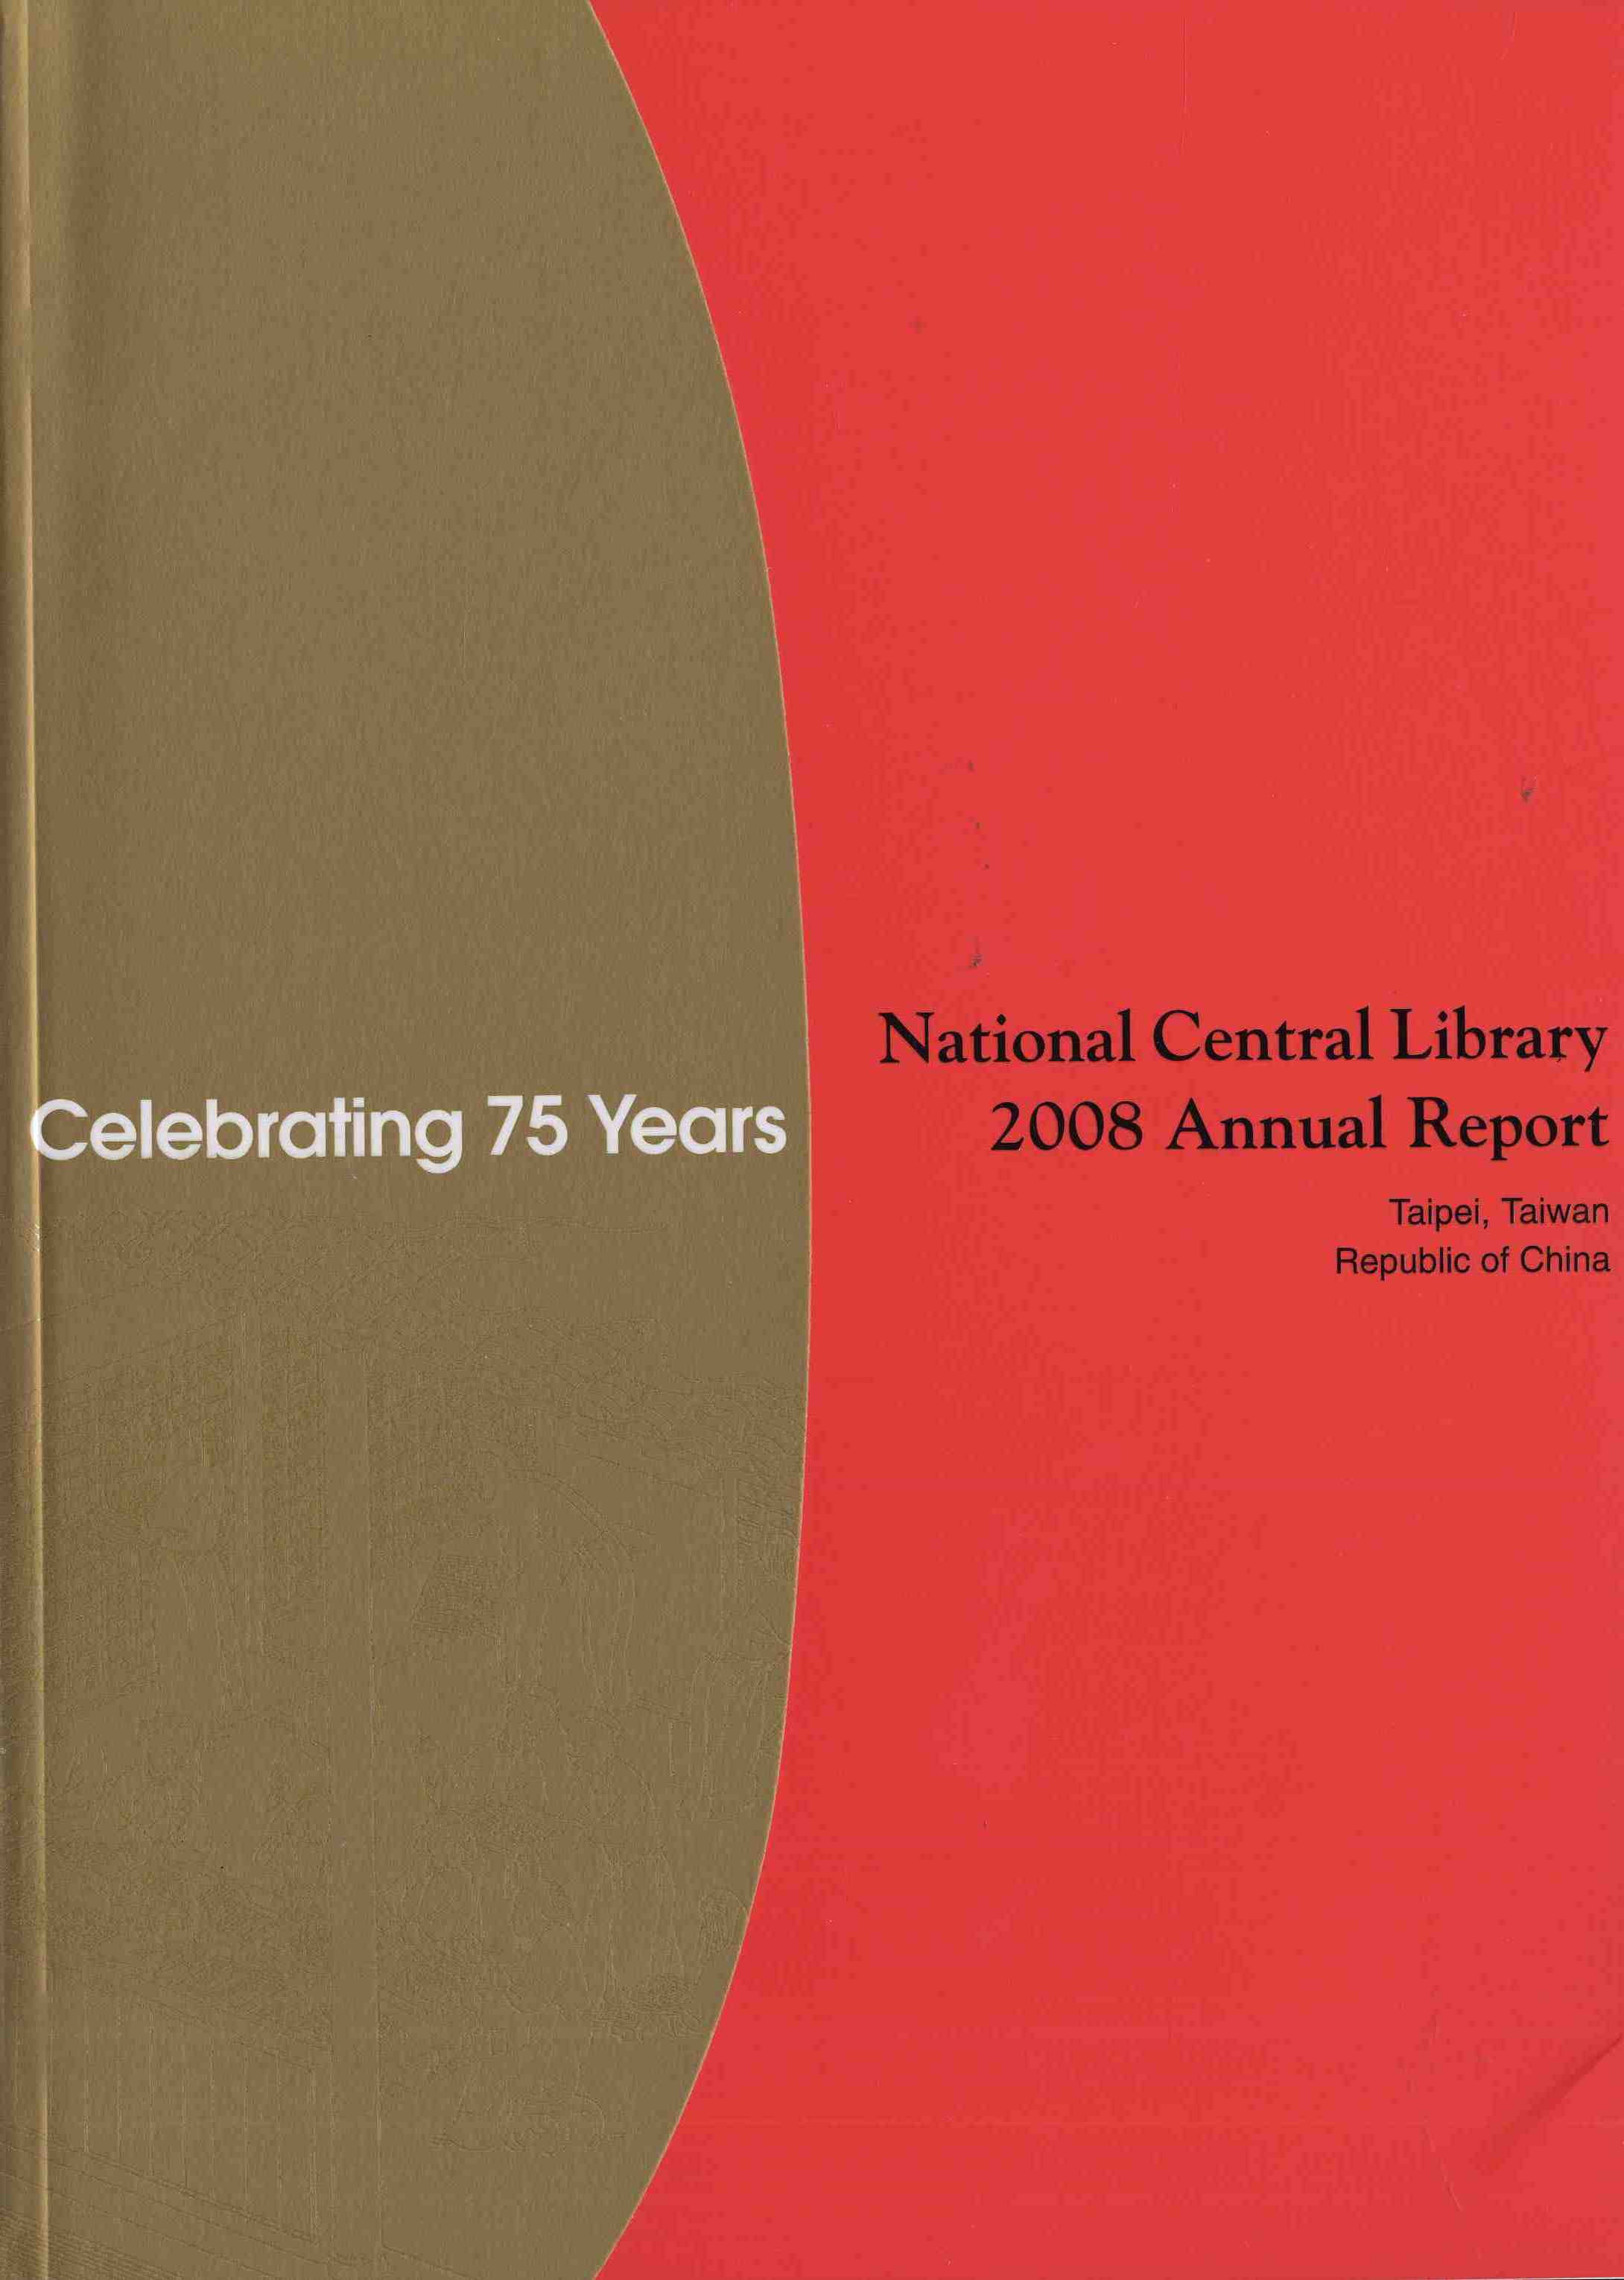 National Central Library 2008 Annual Report